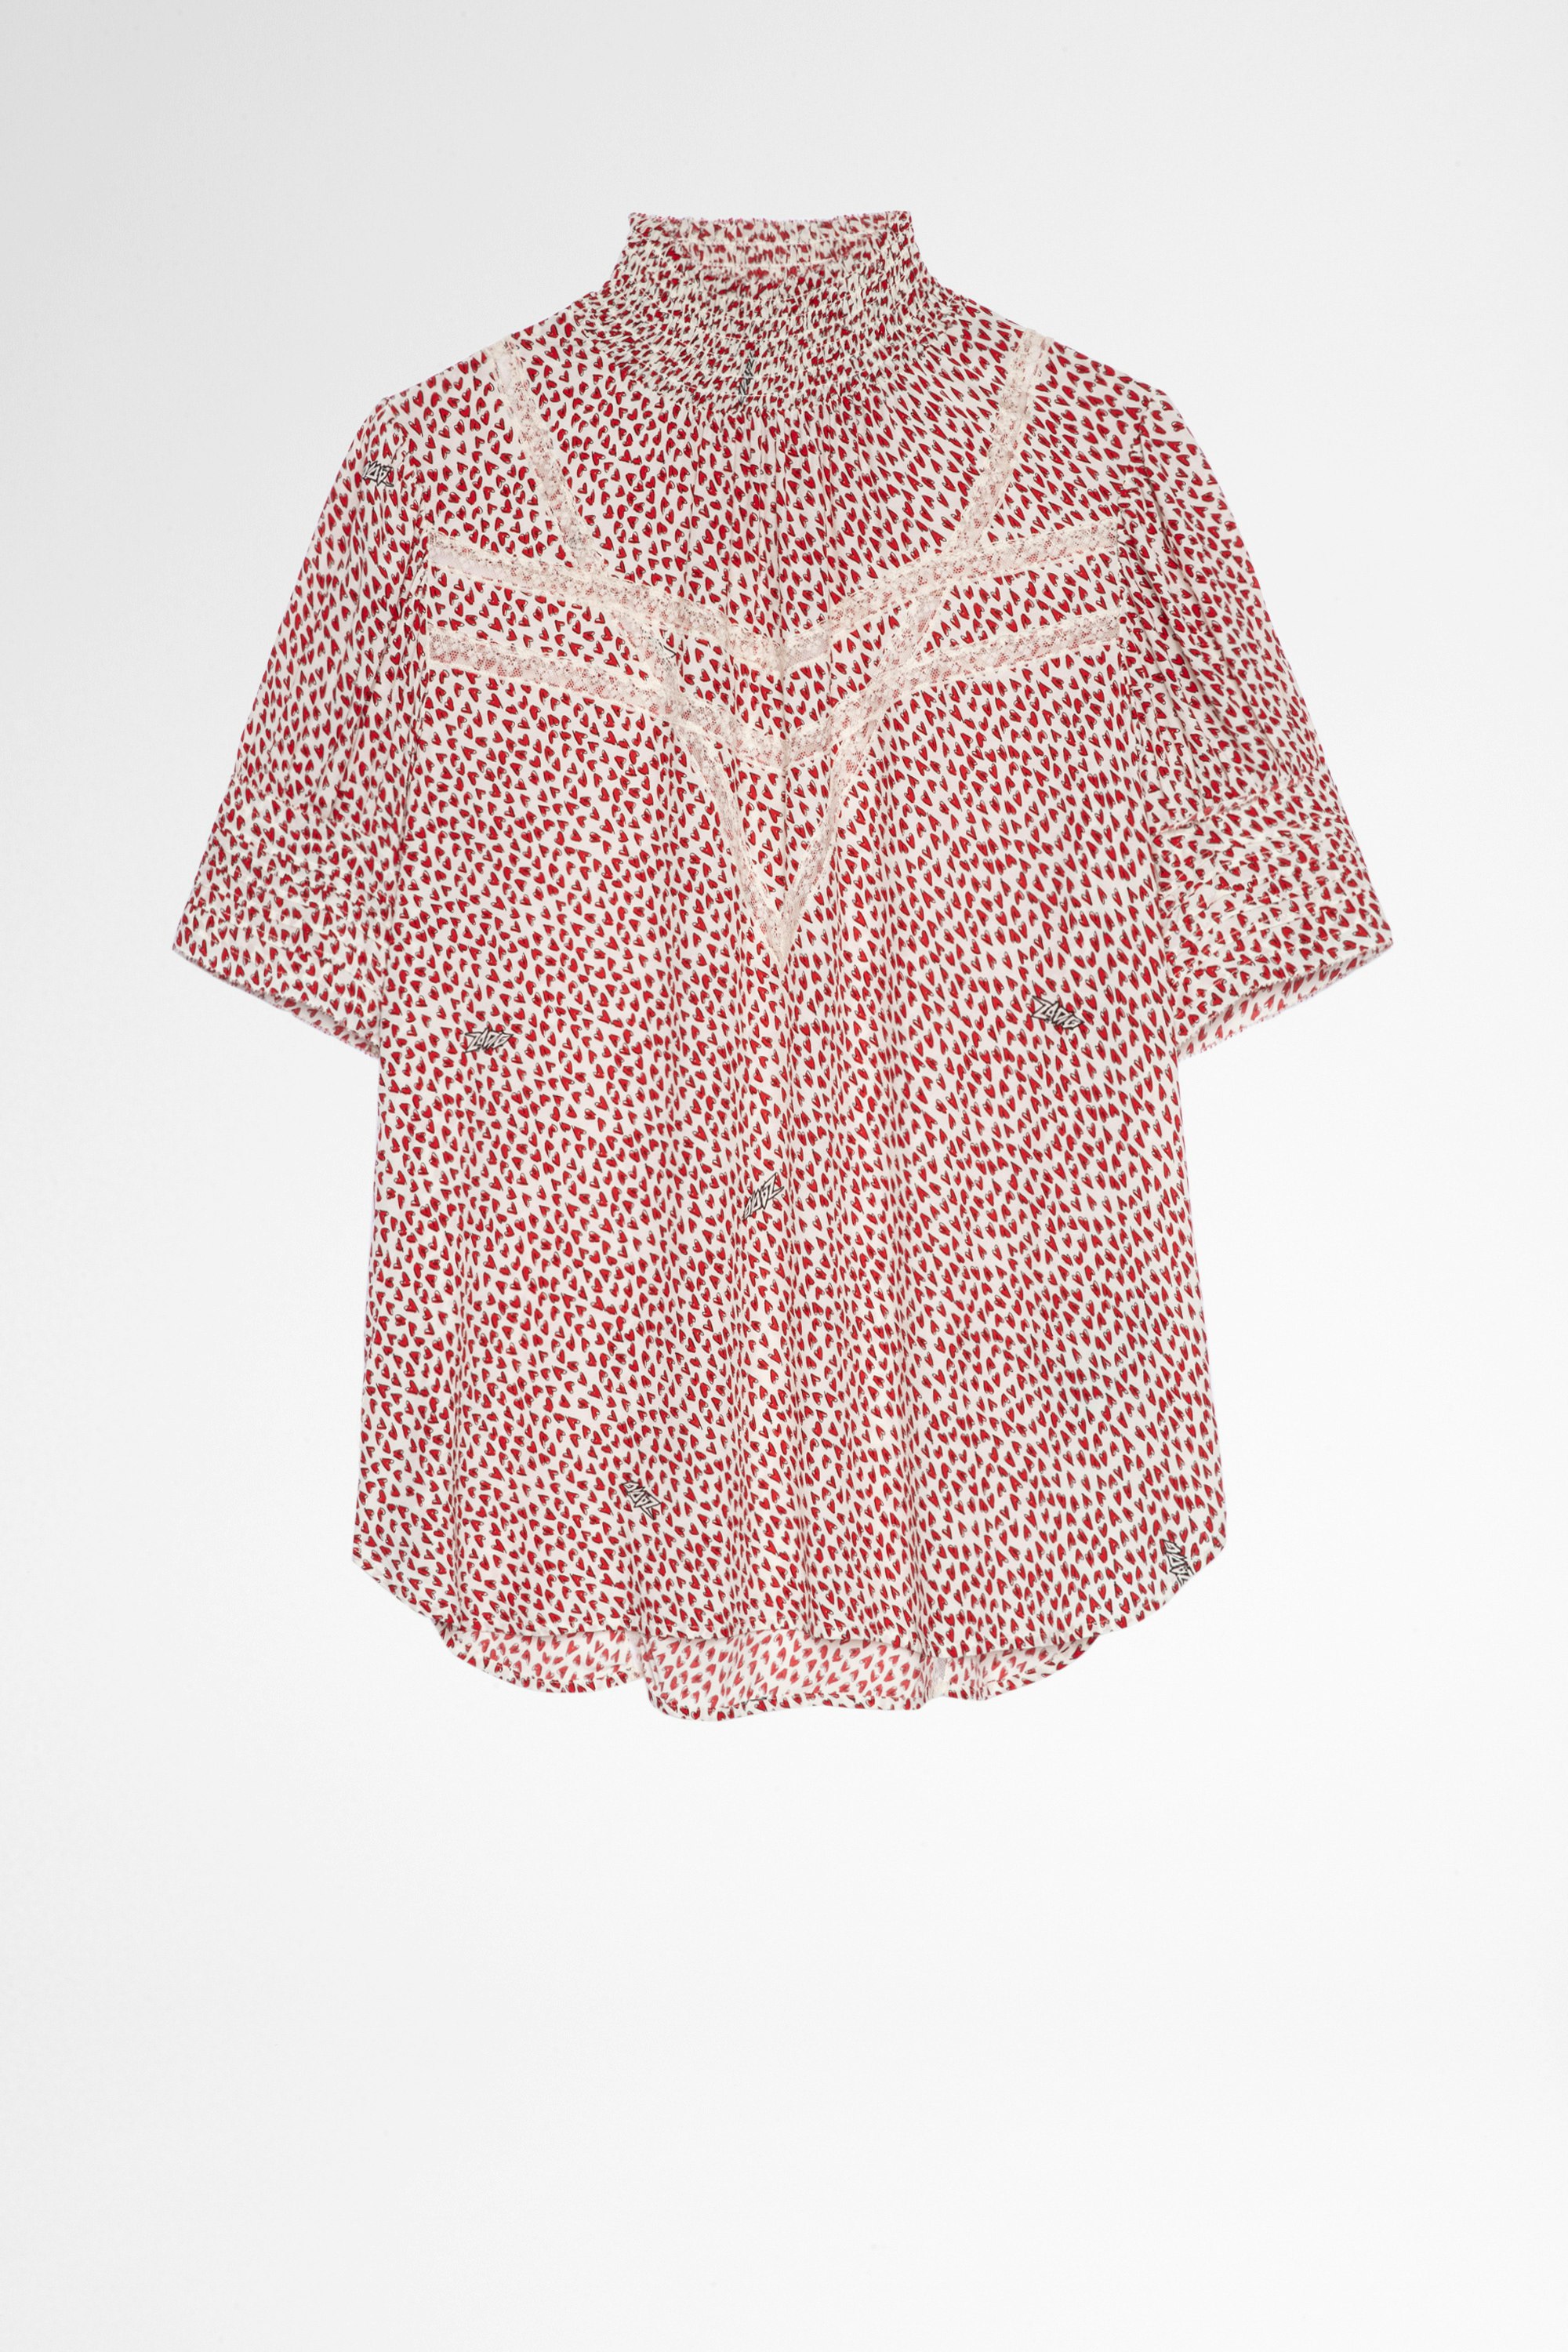 Tupelo Small Heart Top Women's blouse with high collar and small heart print. Made with fibers from sustainably managed forests.